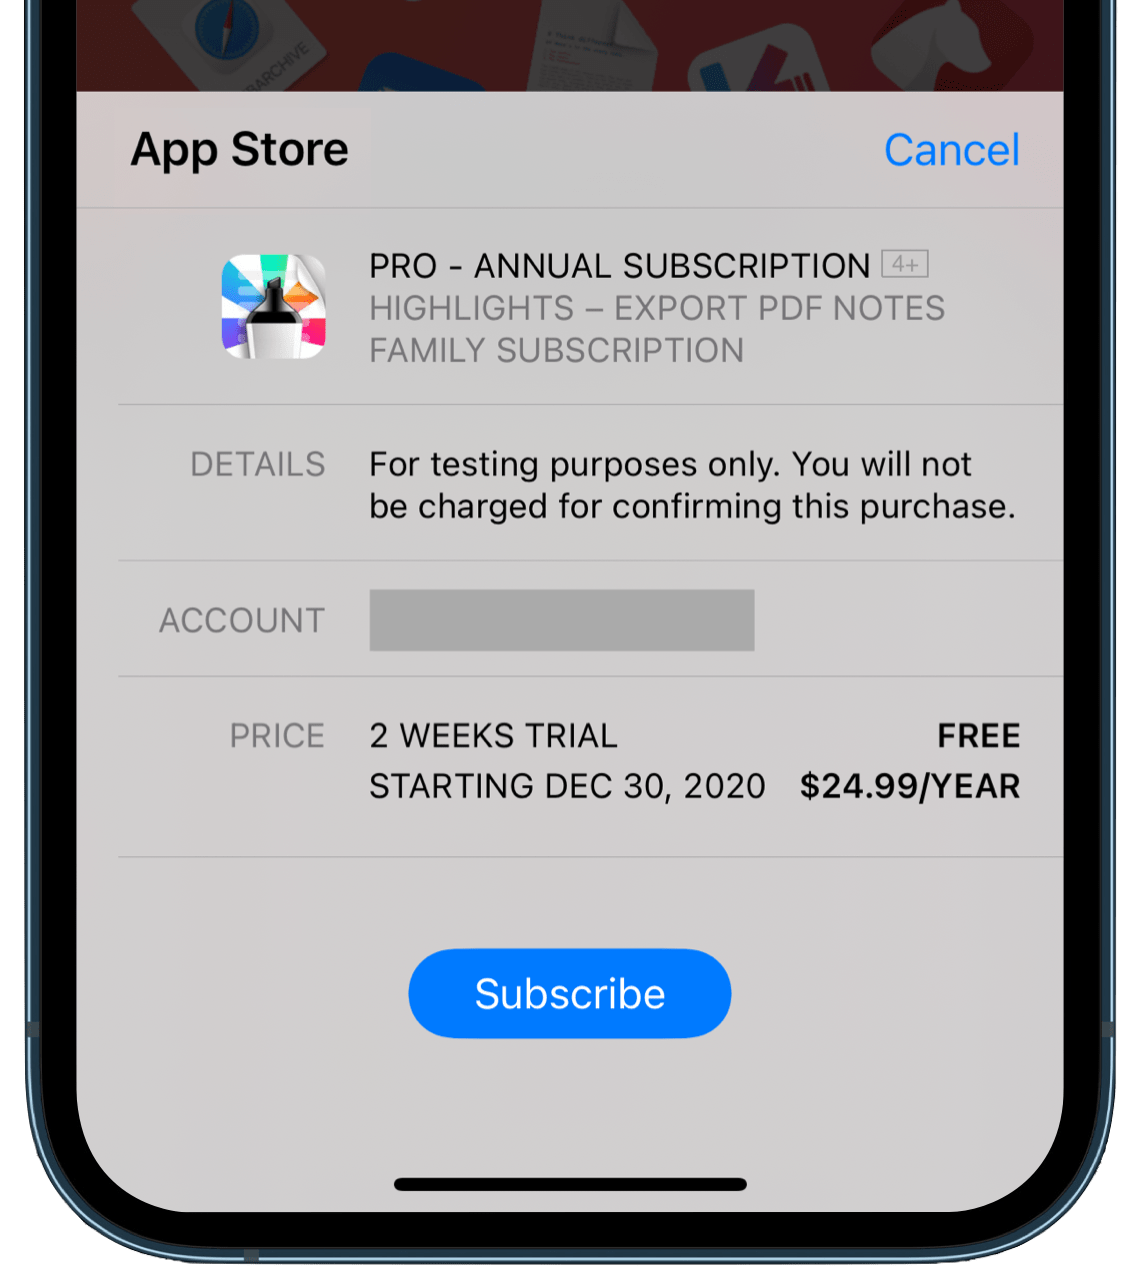 App Store purchase sheet for Highlights Pro subscription